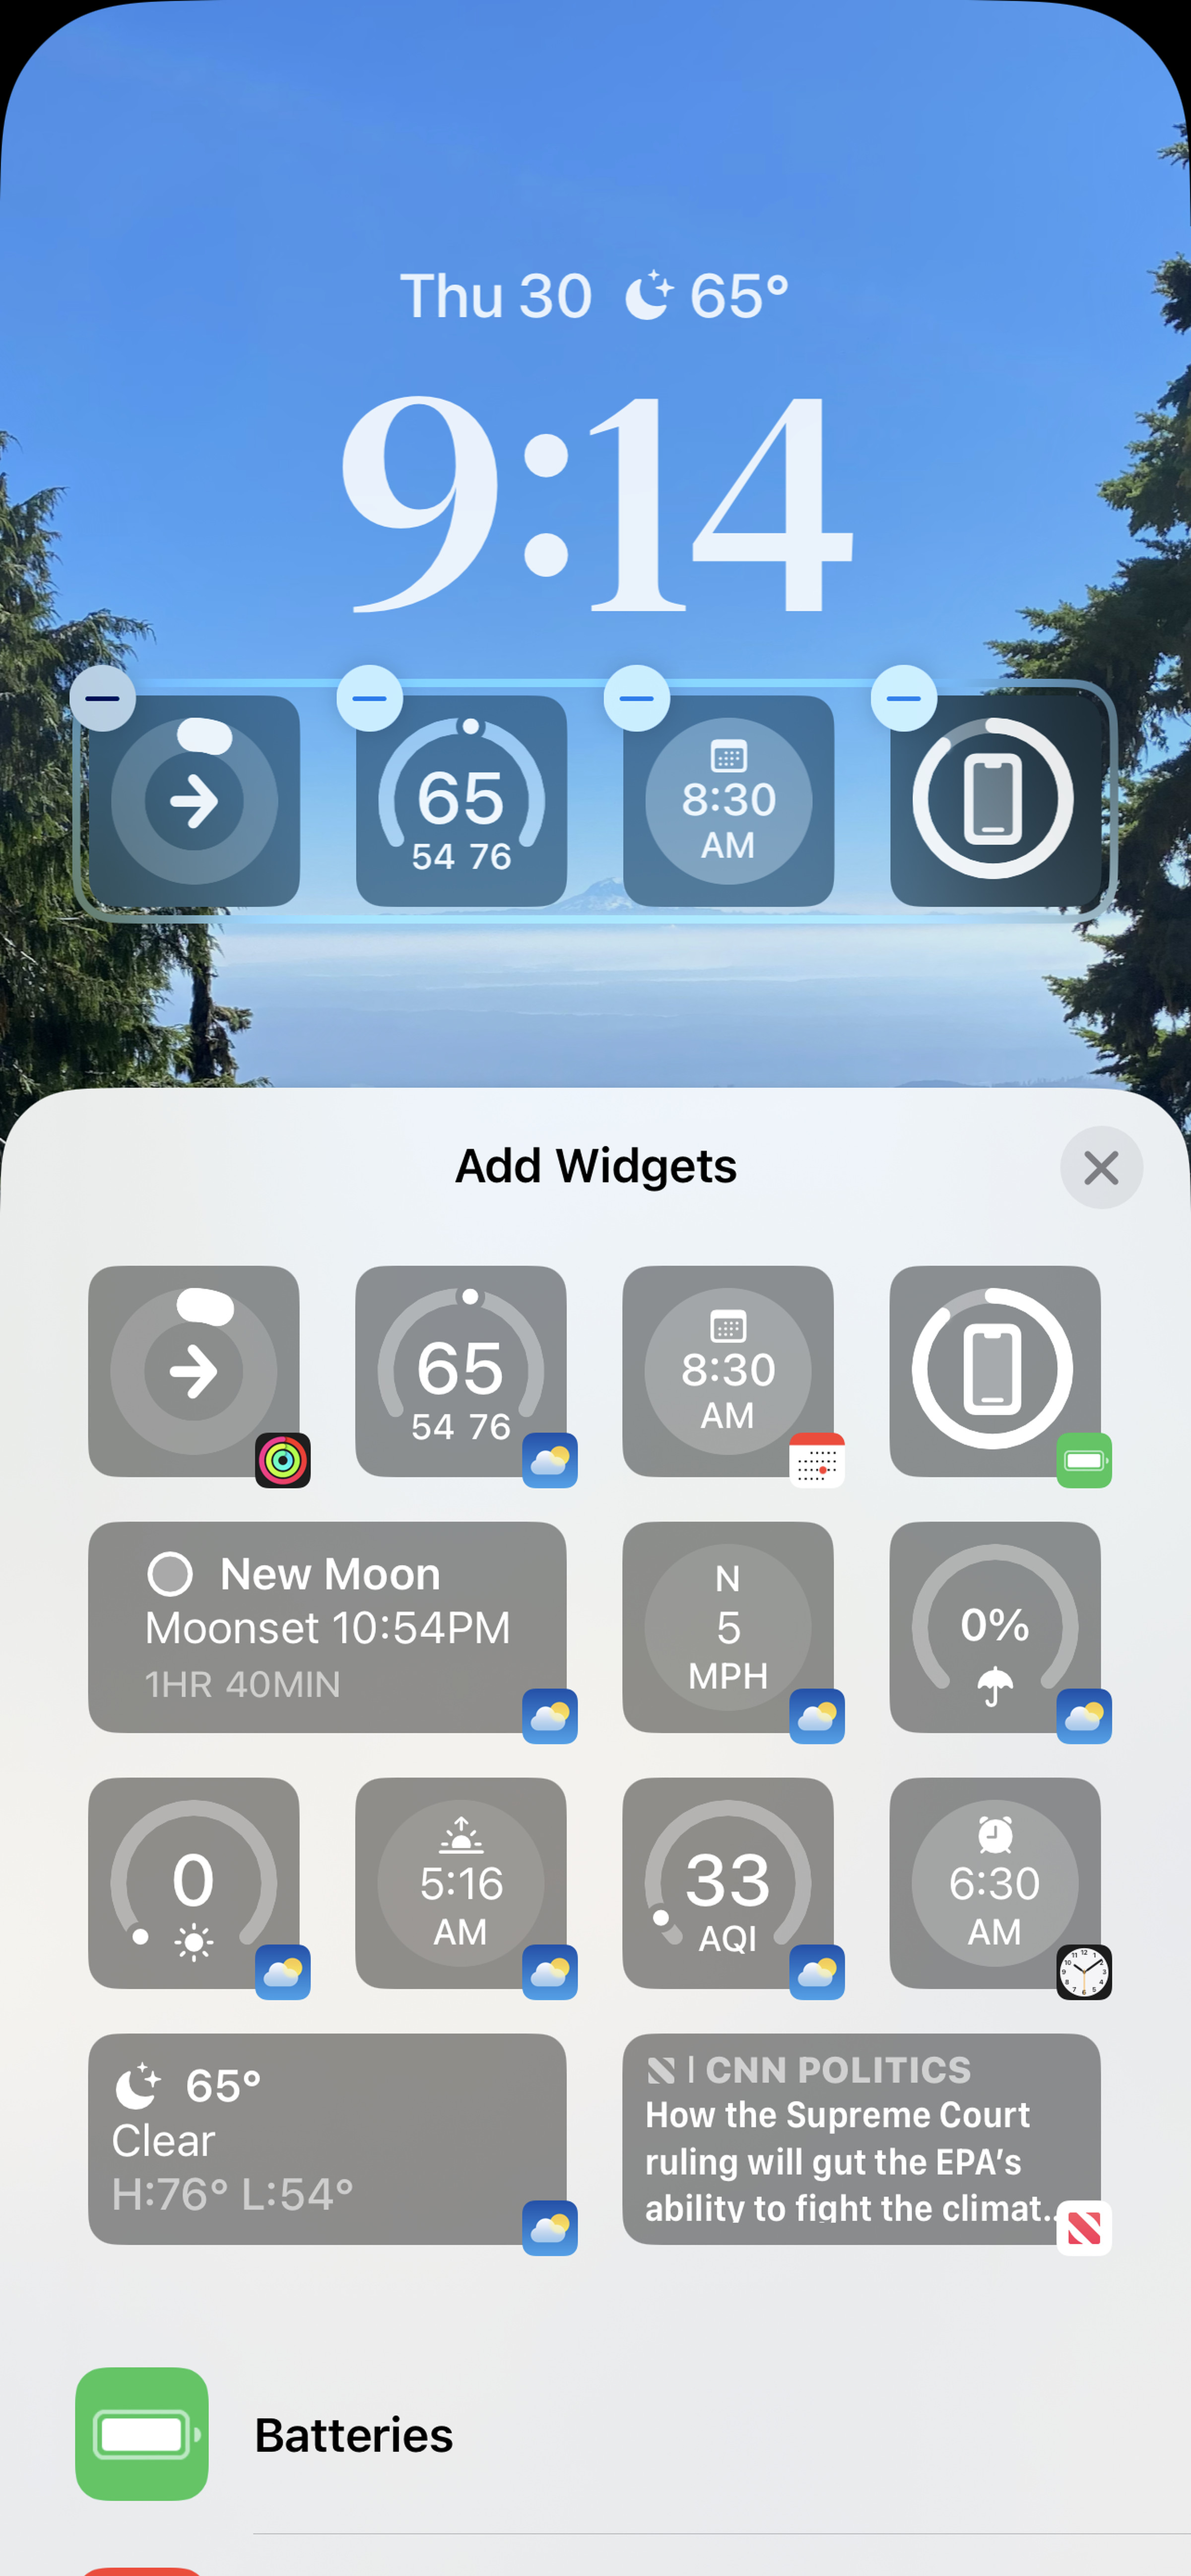 You can add up to four widgets in the shelf below the clock.